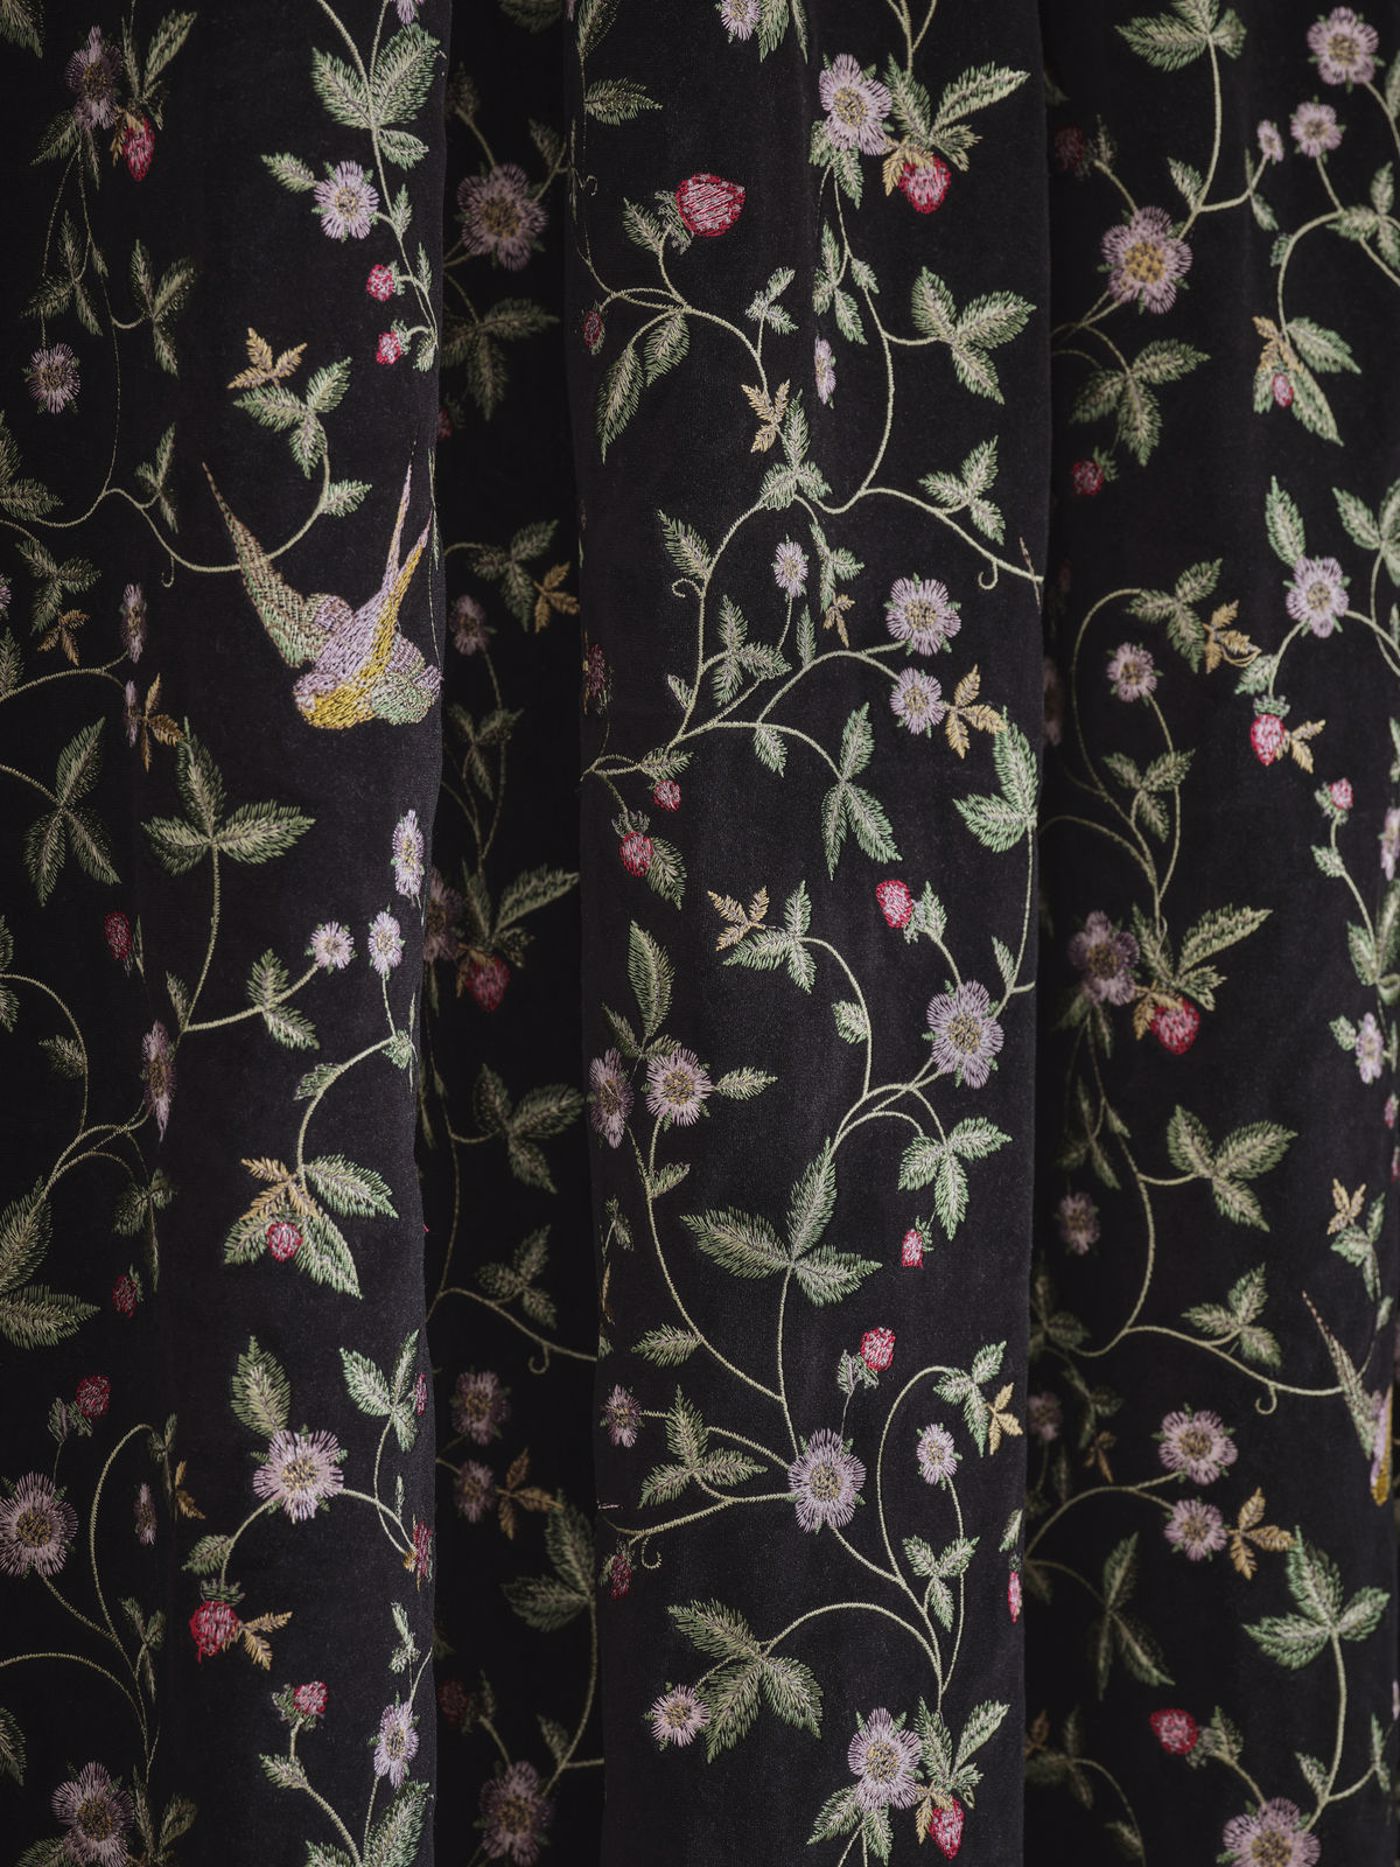 Wild Strawberry Noir Embroidery Fabric by WED